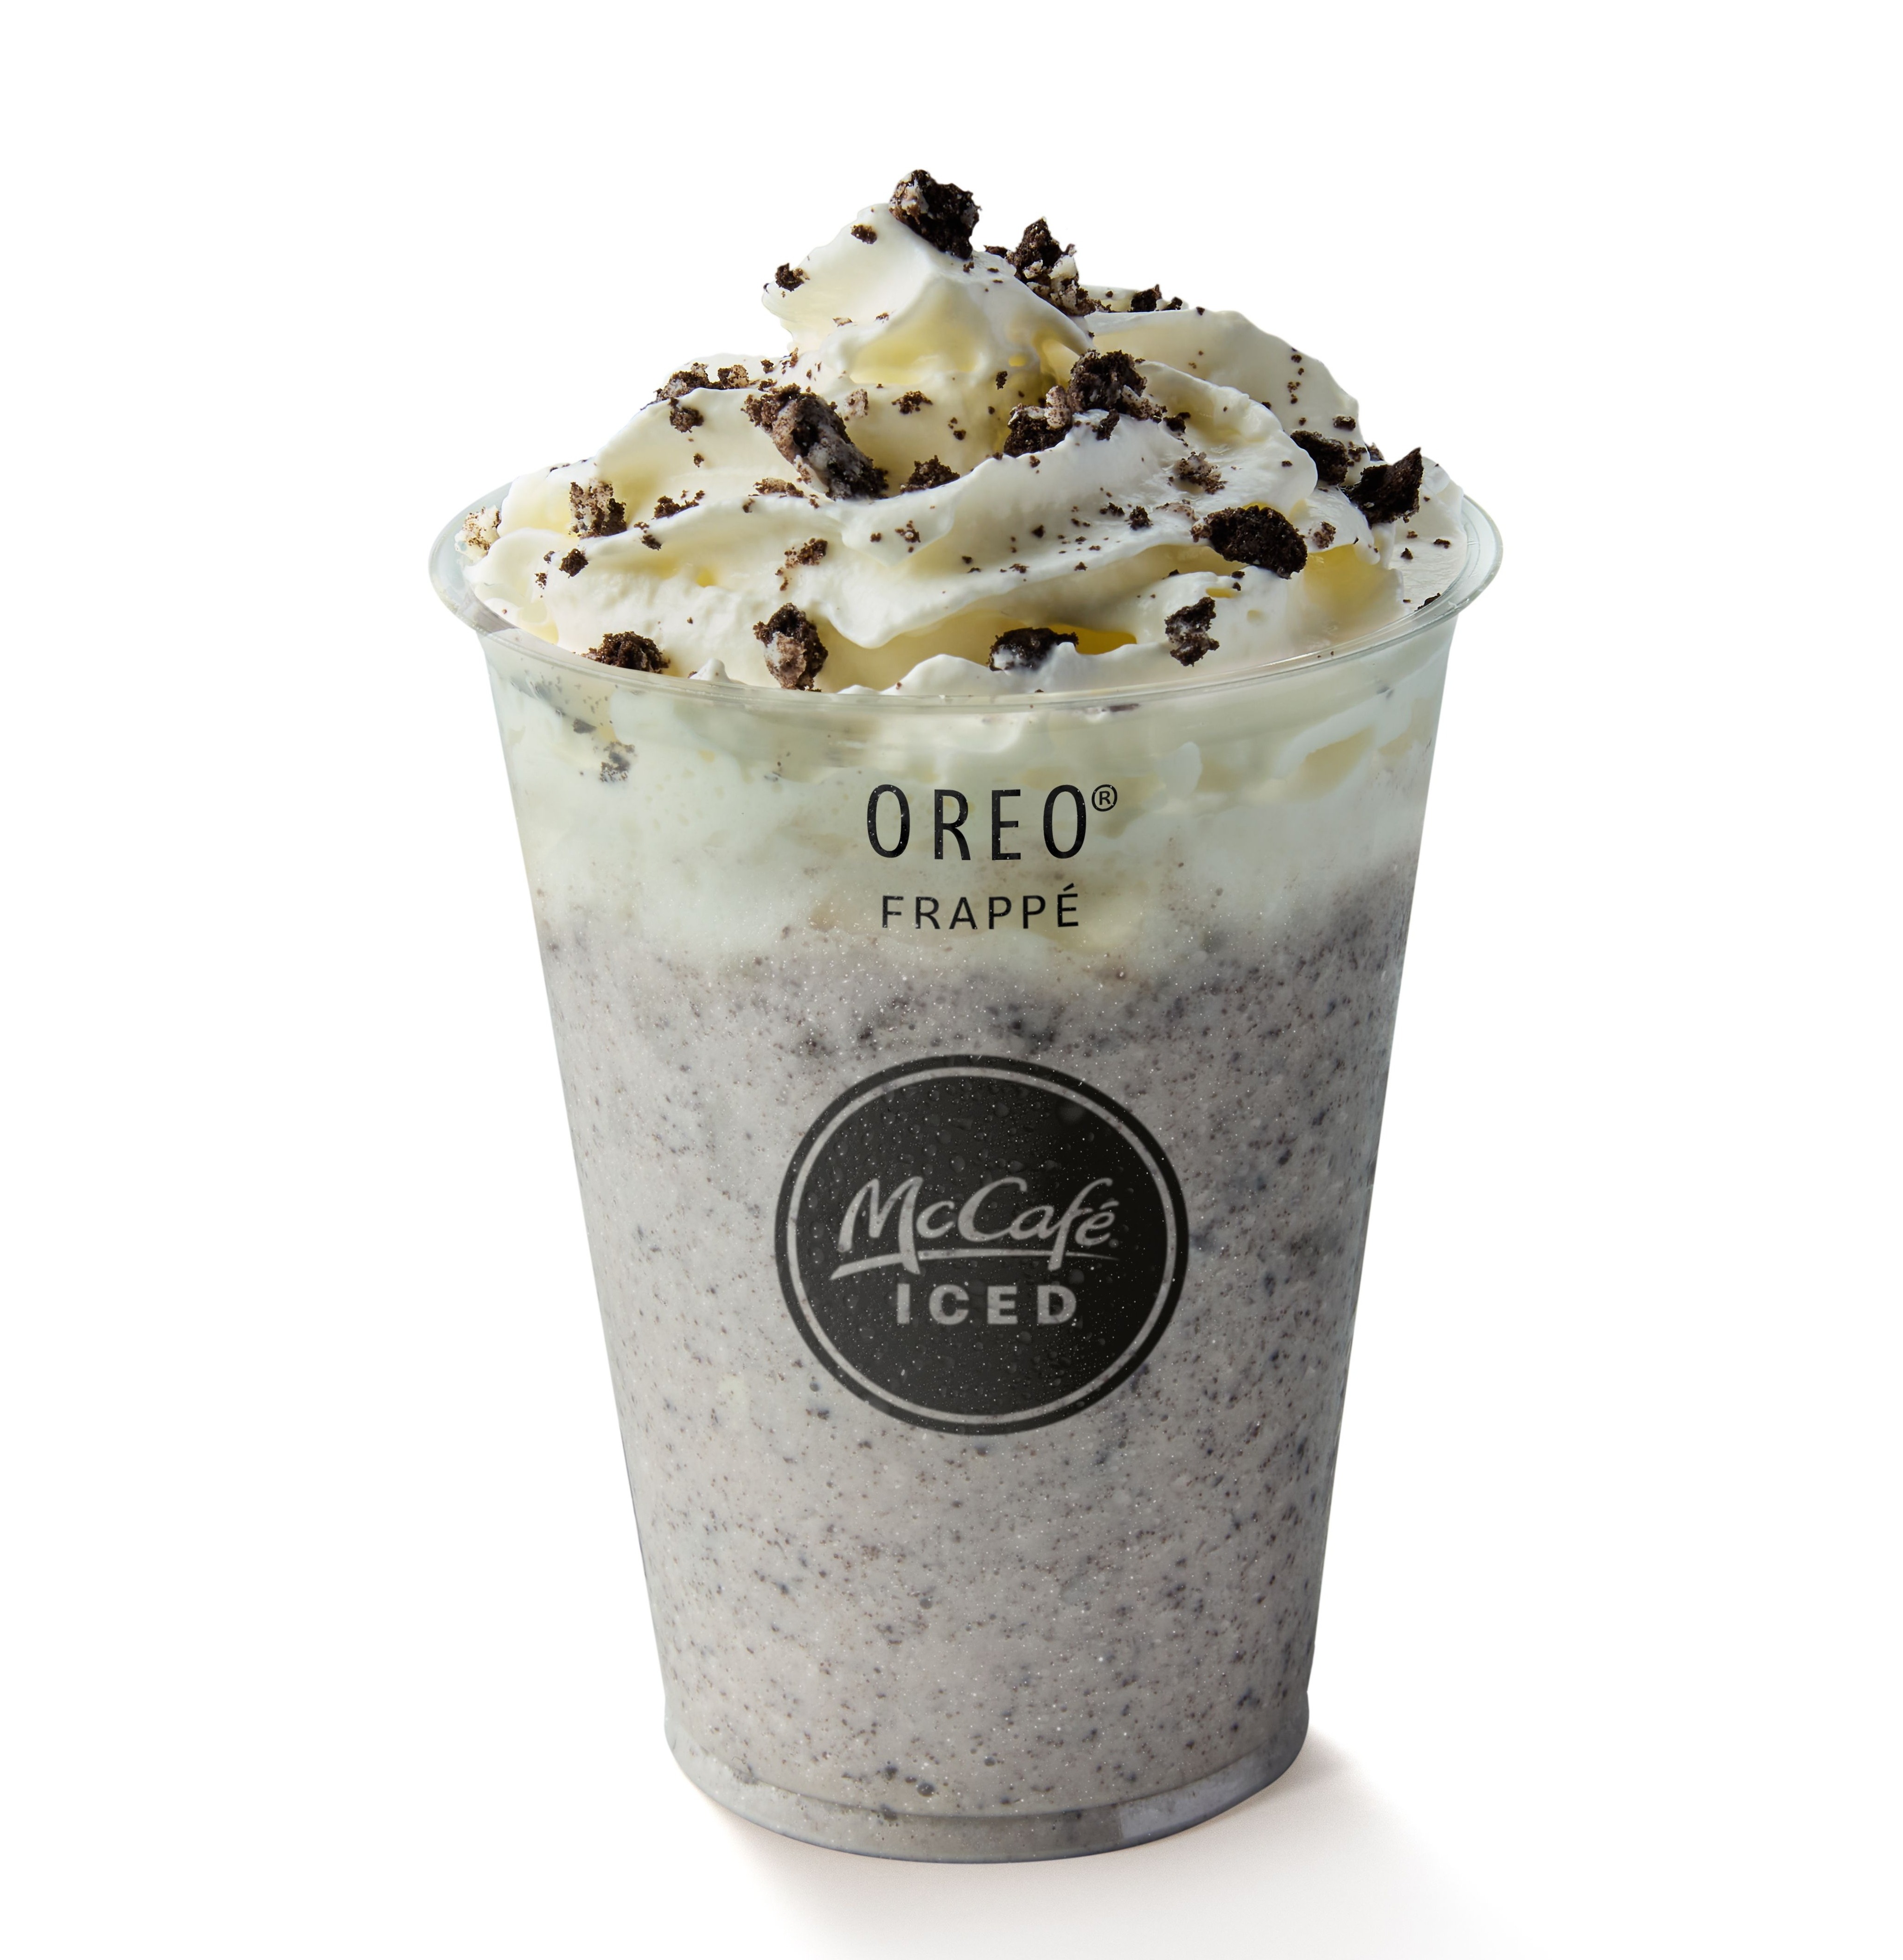 The Oreo Frappe will replace the Biscoff Frappe